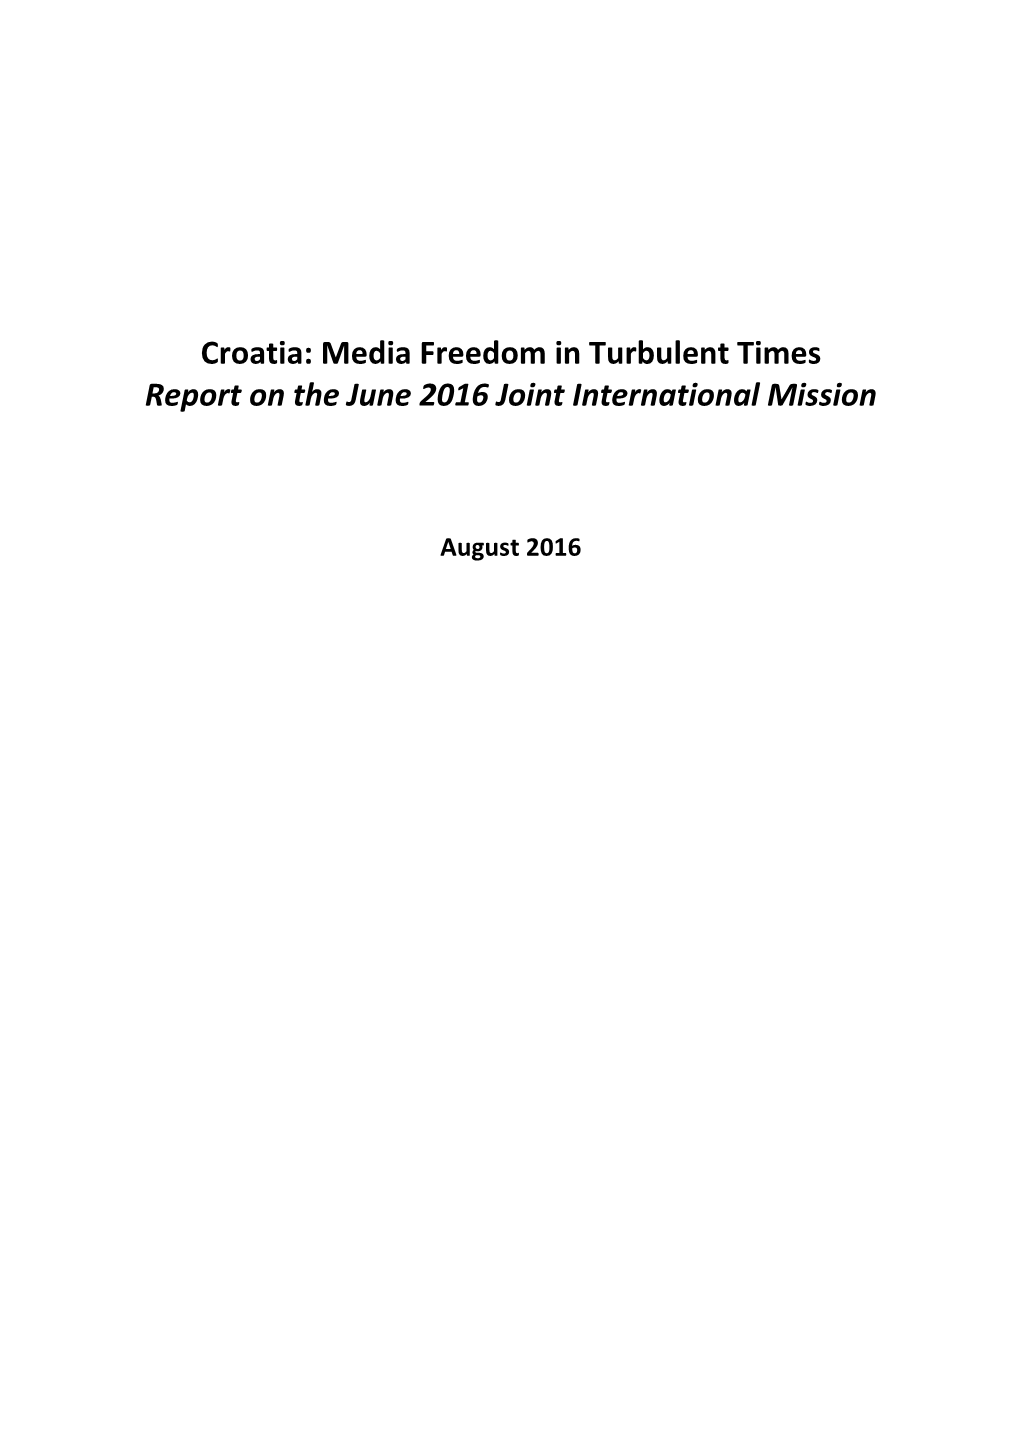 Croatia: Media Freedom in Turbulent Times Report on the June 2016 Joint International Mission